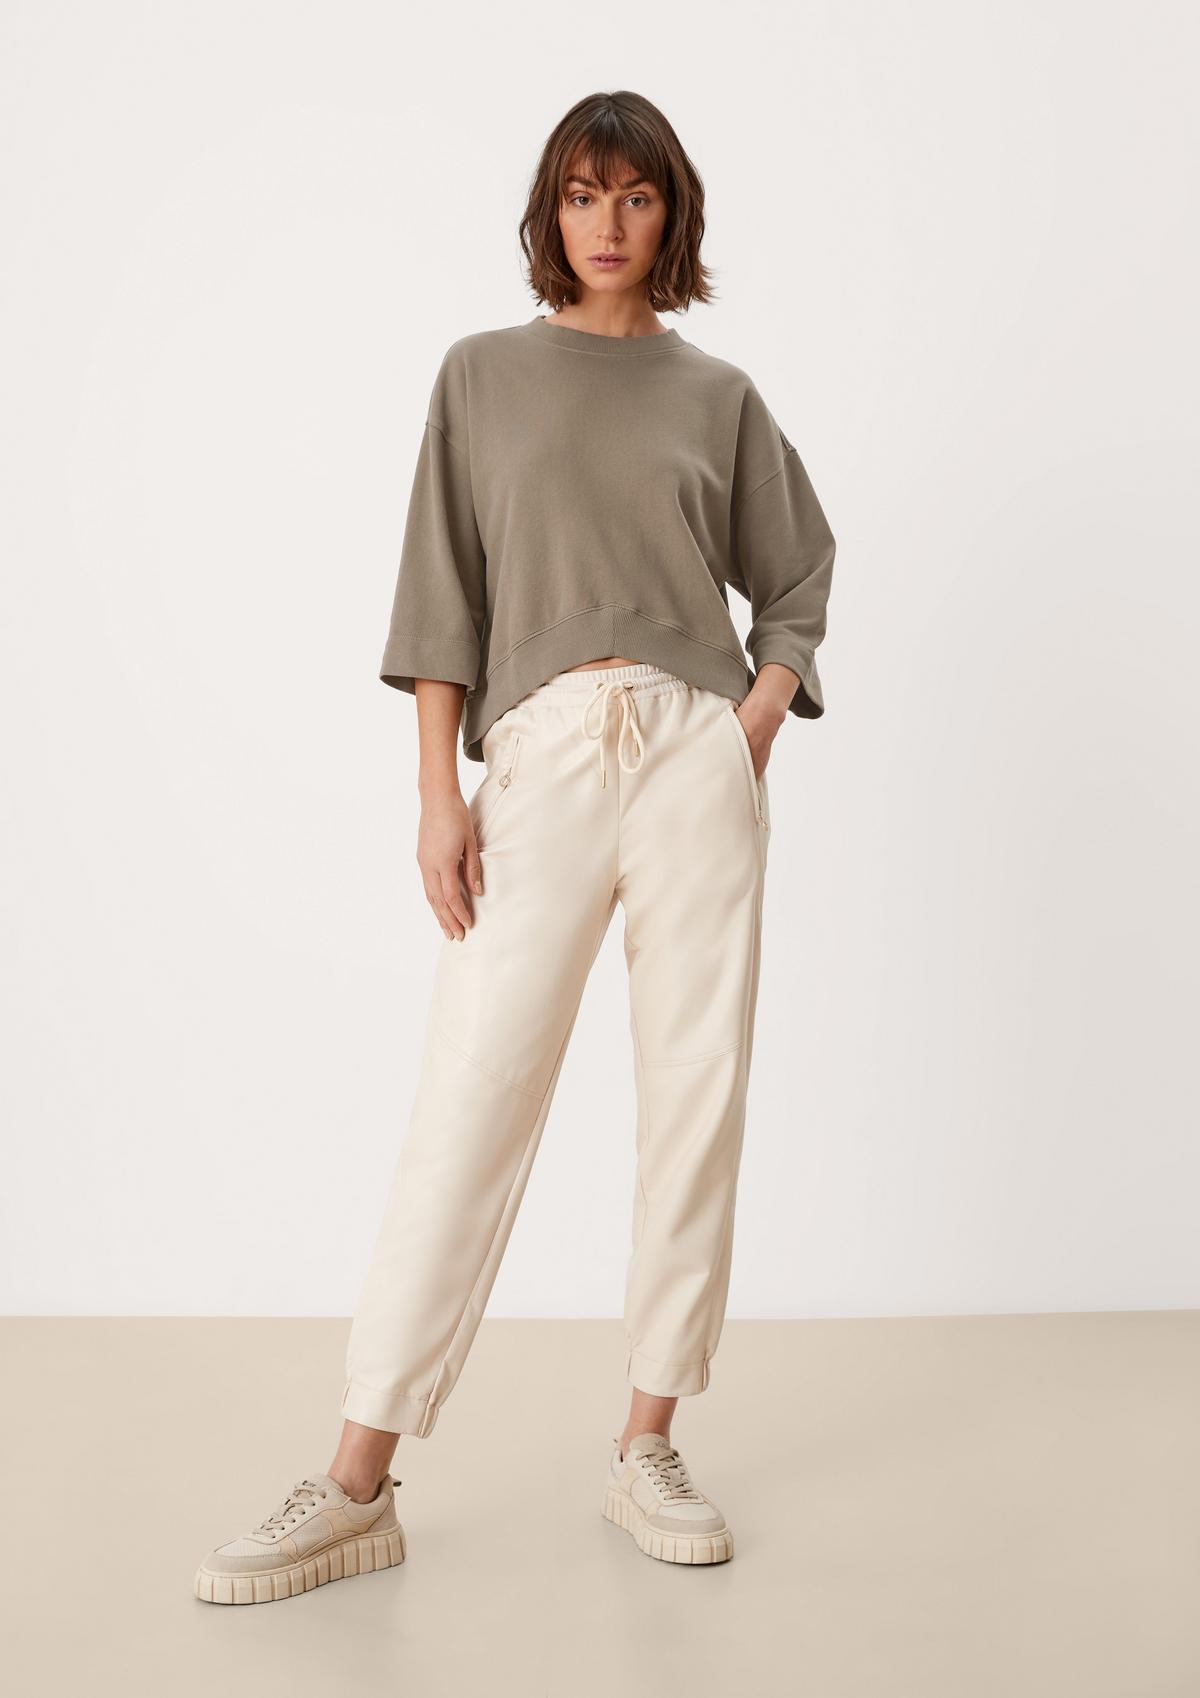 s.Oliver Sweatshirt with a cropped front hem